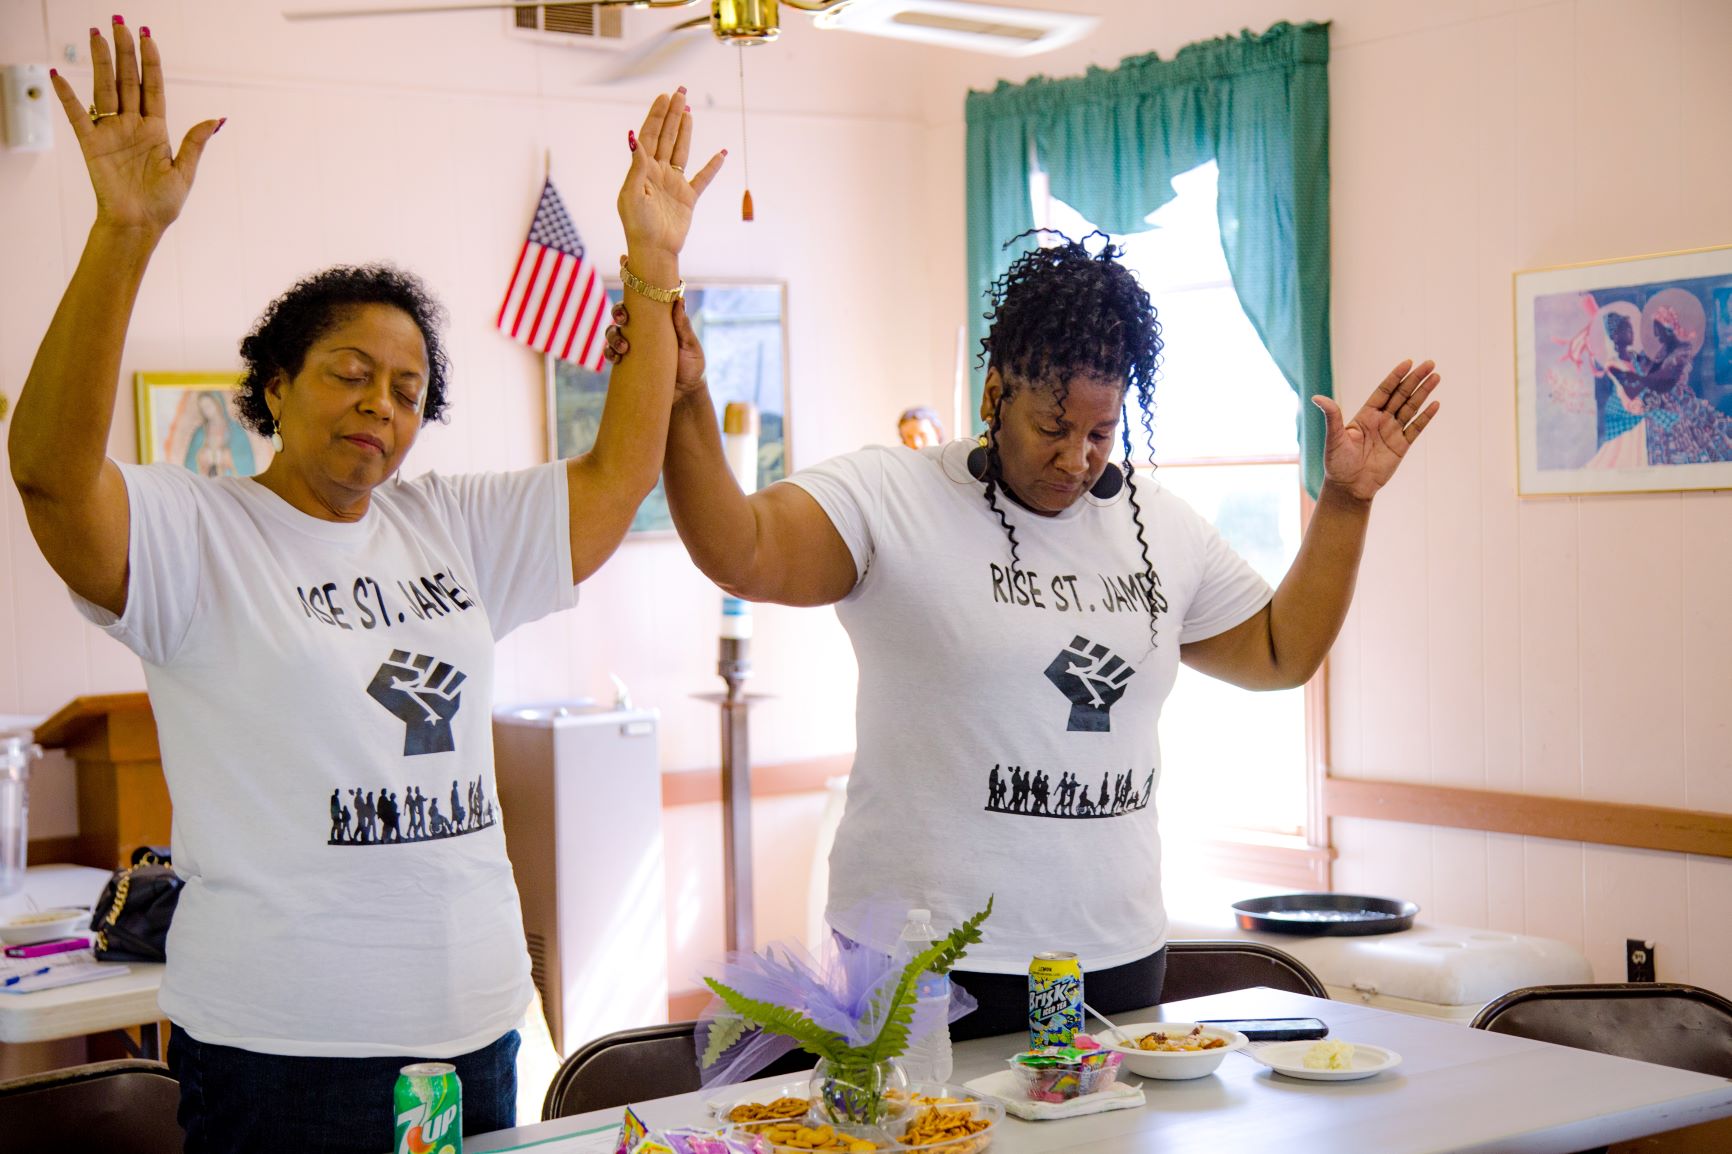 Sharon Lavigne (left), founder of RISE St. James, joins another activist in a moment of prayer at a community meeting in 2019.